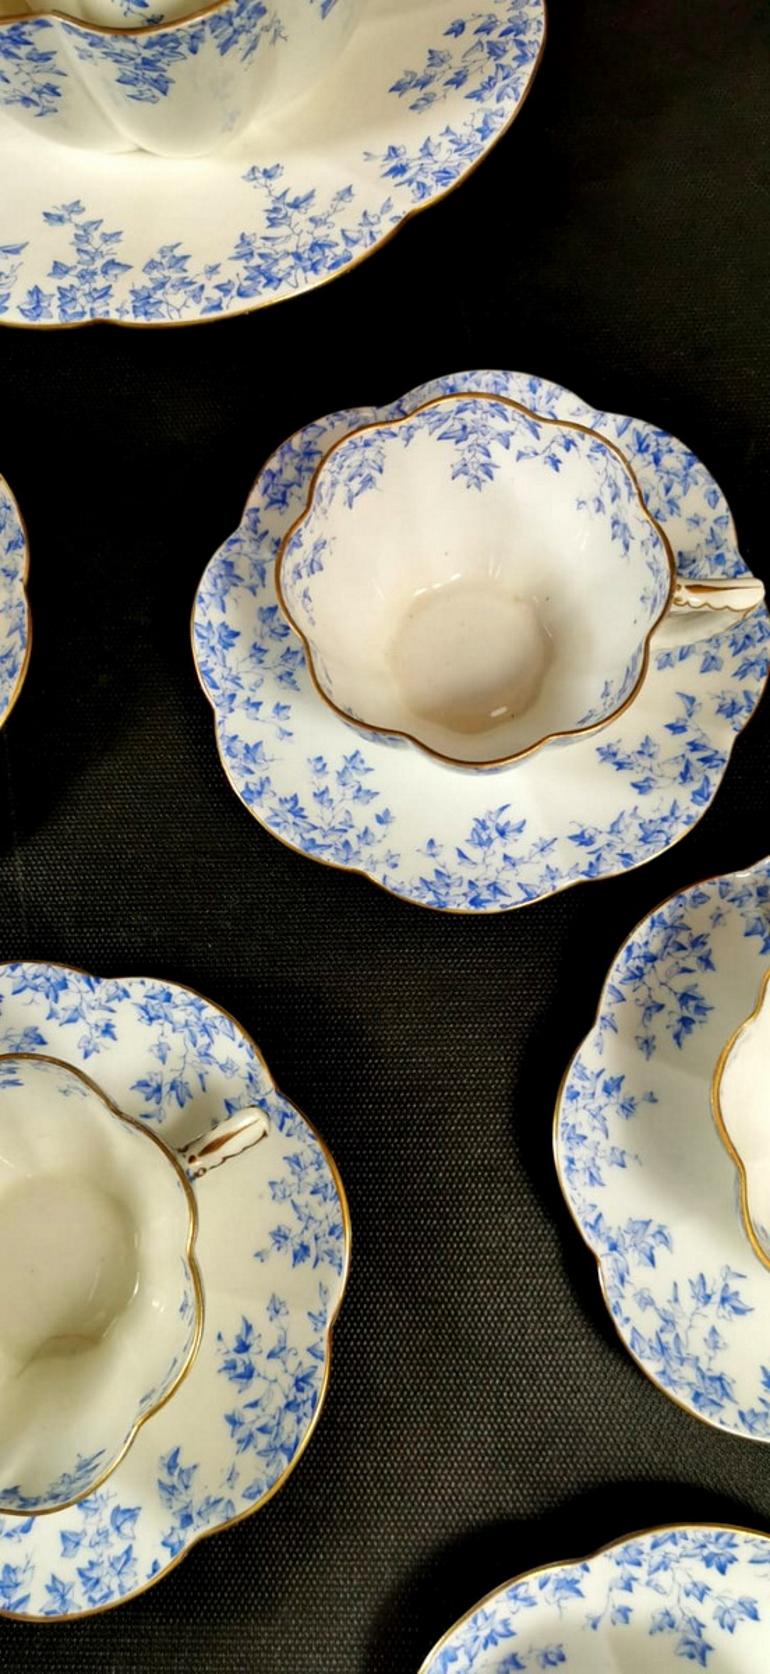 Staffordshire Porcelain Service English Coffee-Tea Cups with Plate 1